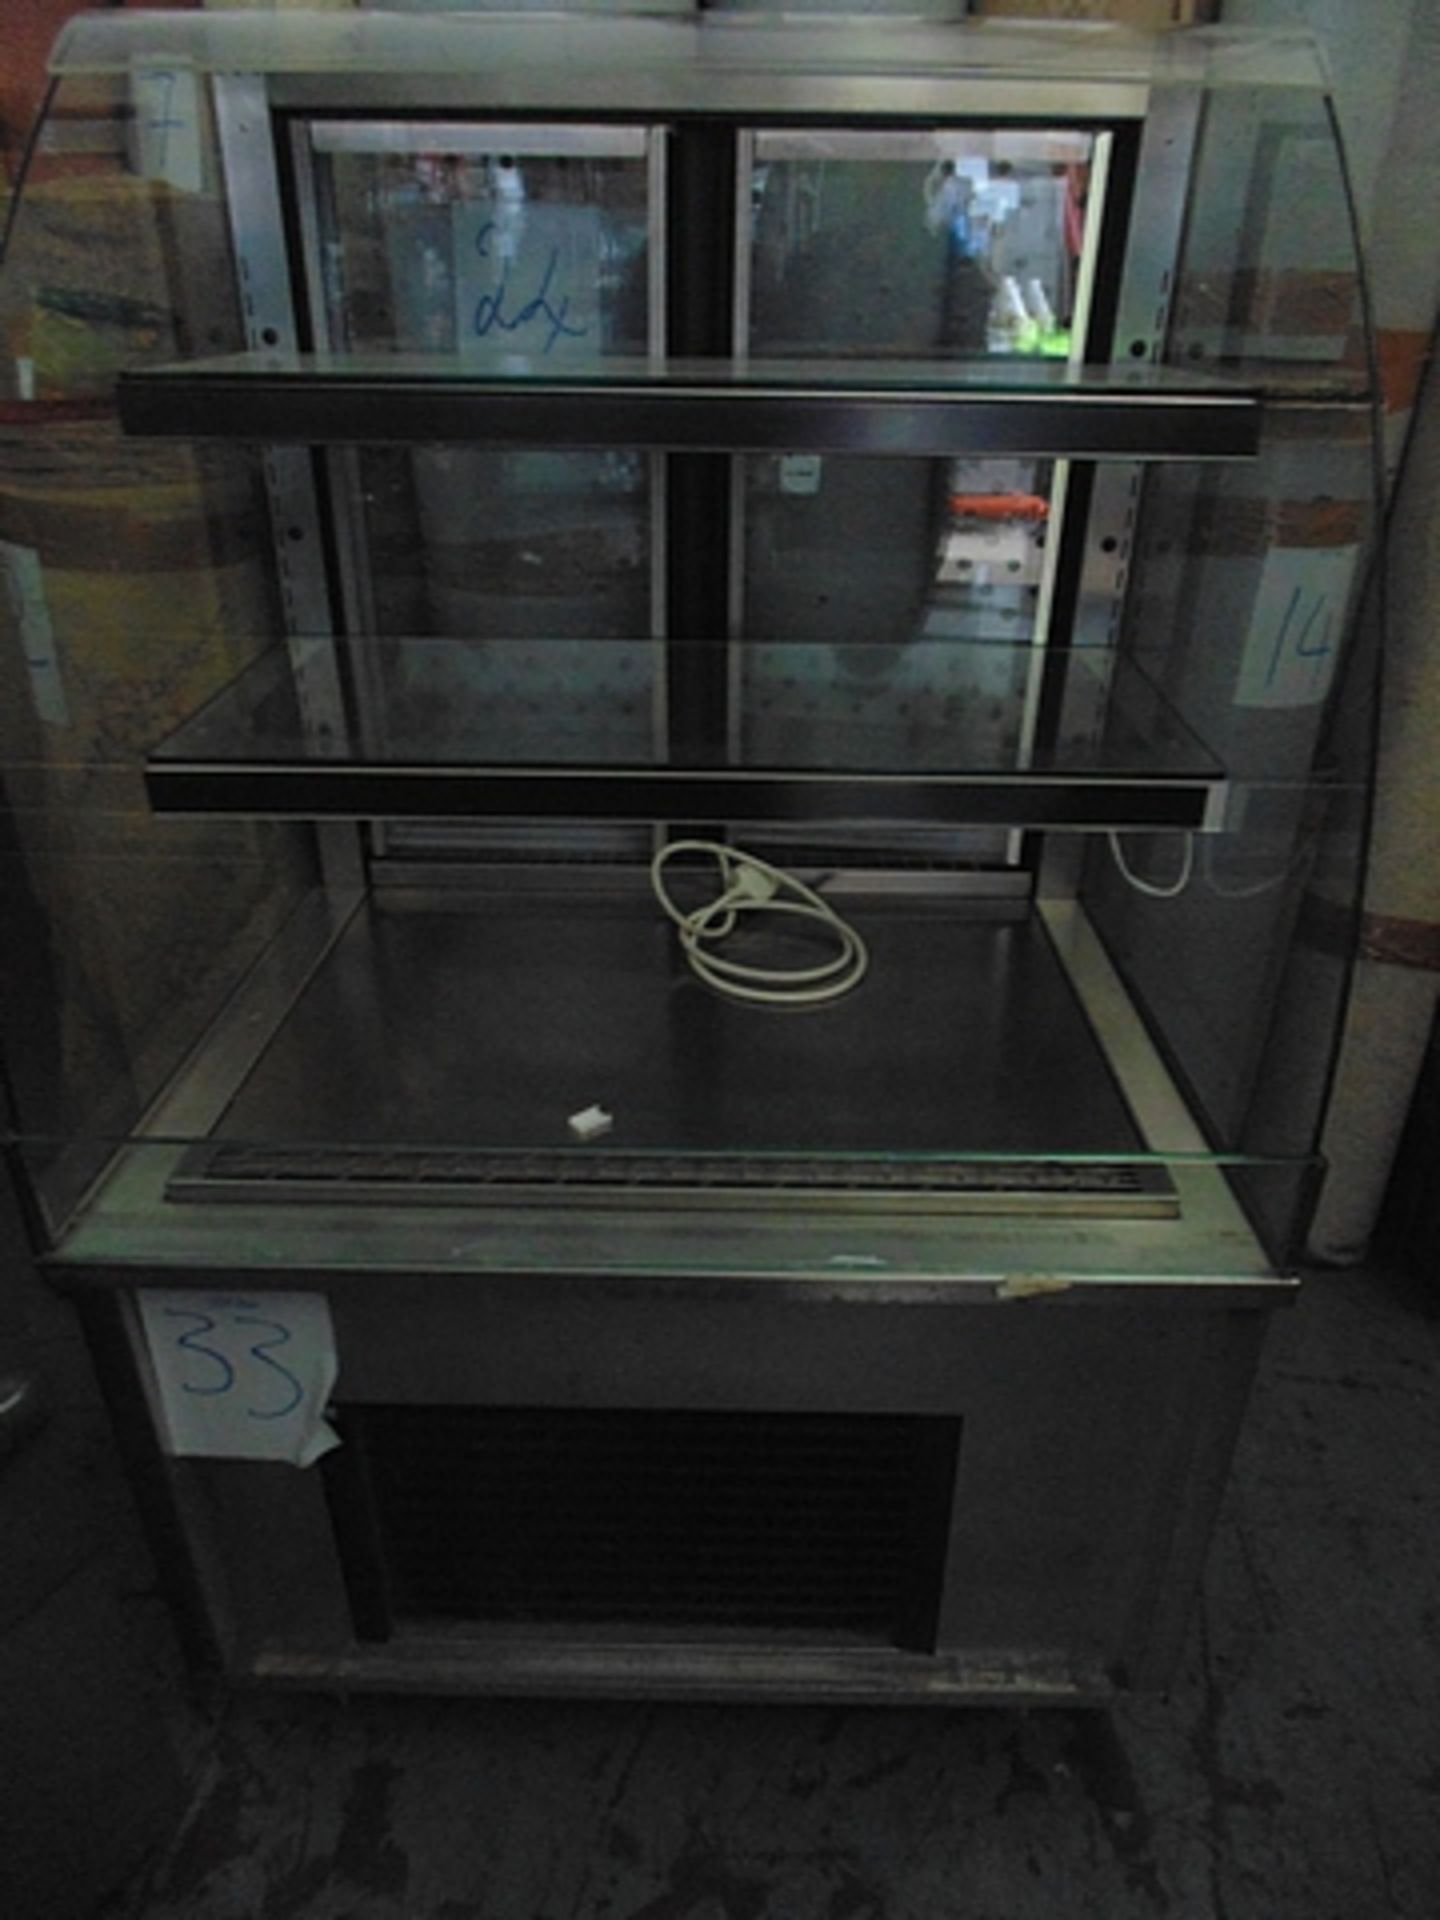 Enodis 900 self service chilled cabinet 900mm x 750mm x 1440mm